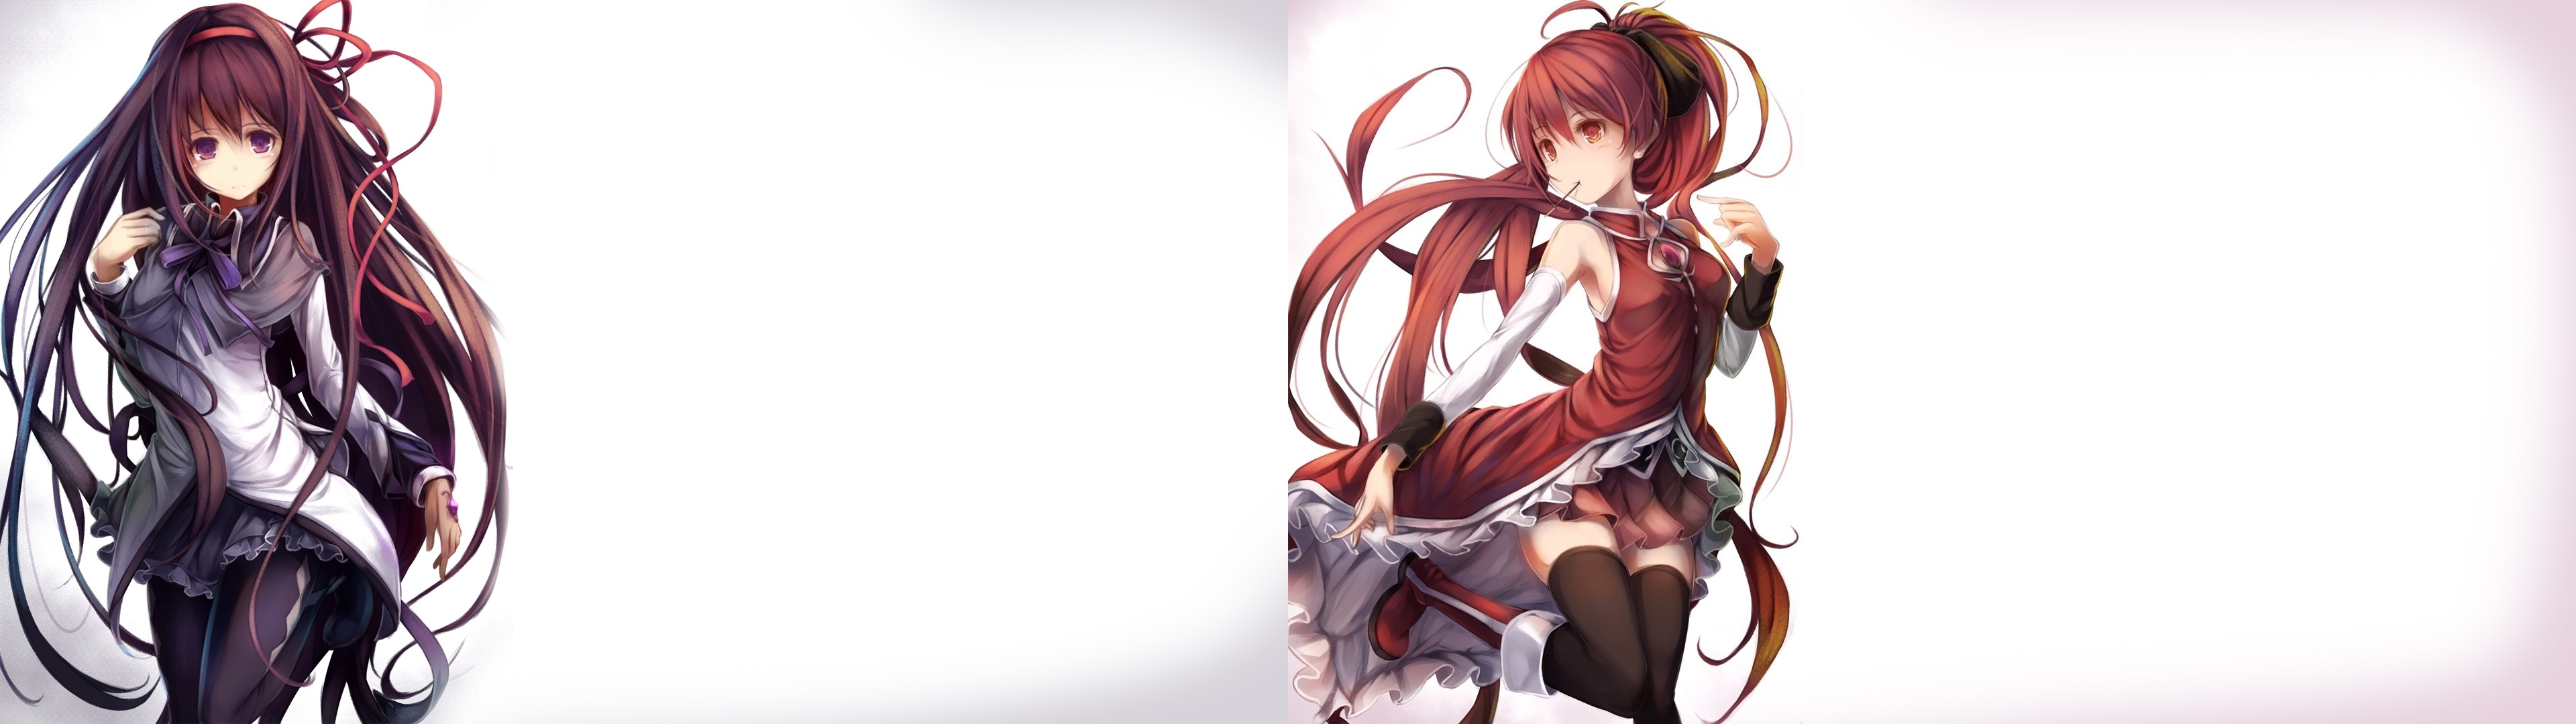 Anime 3840x1080 Wallpapers  Wallpaper Cave